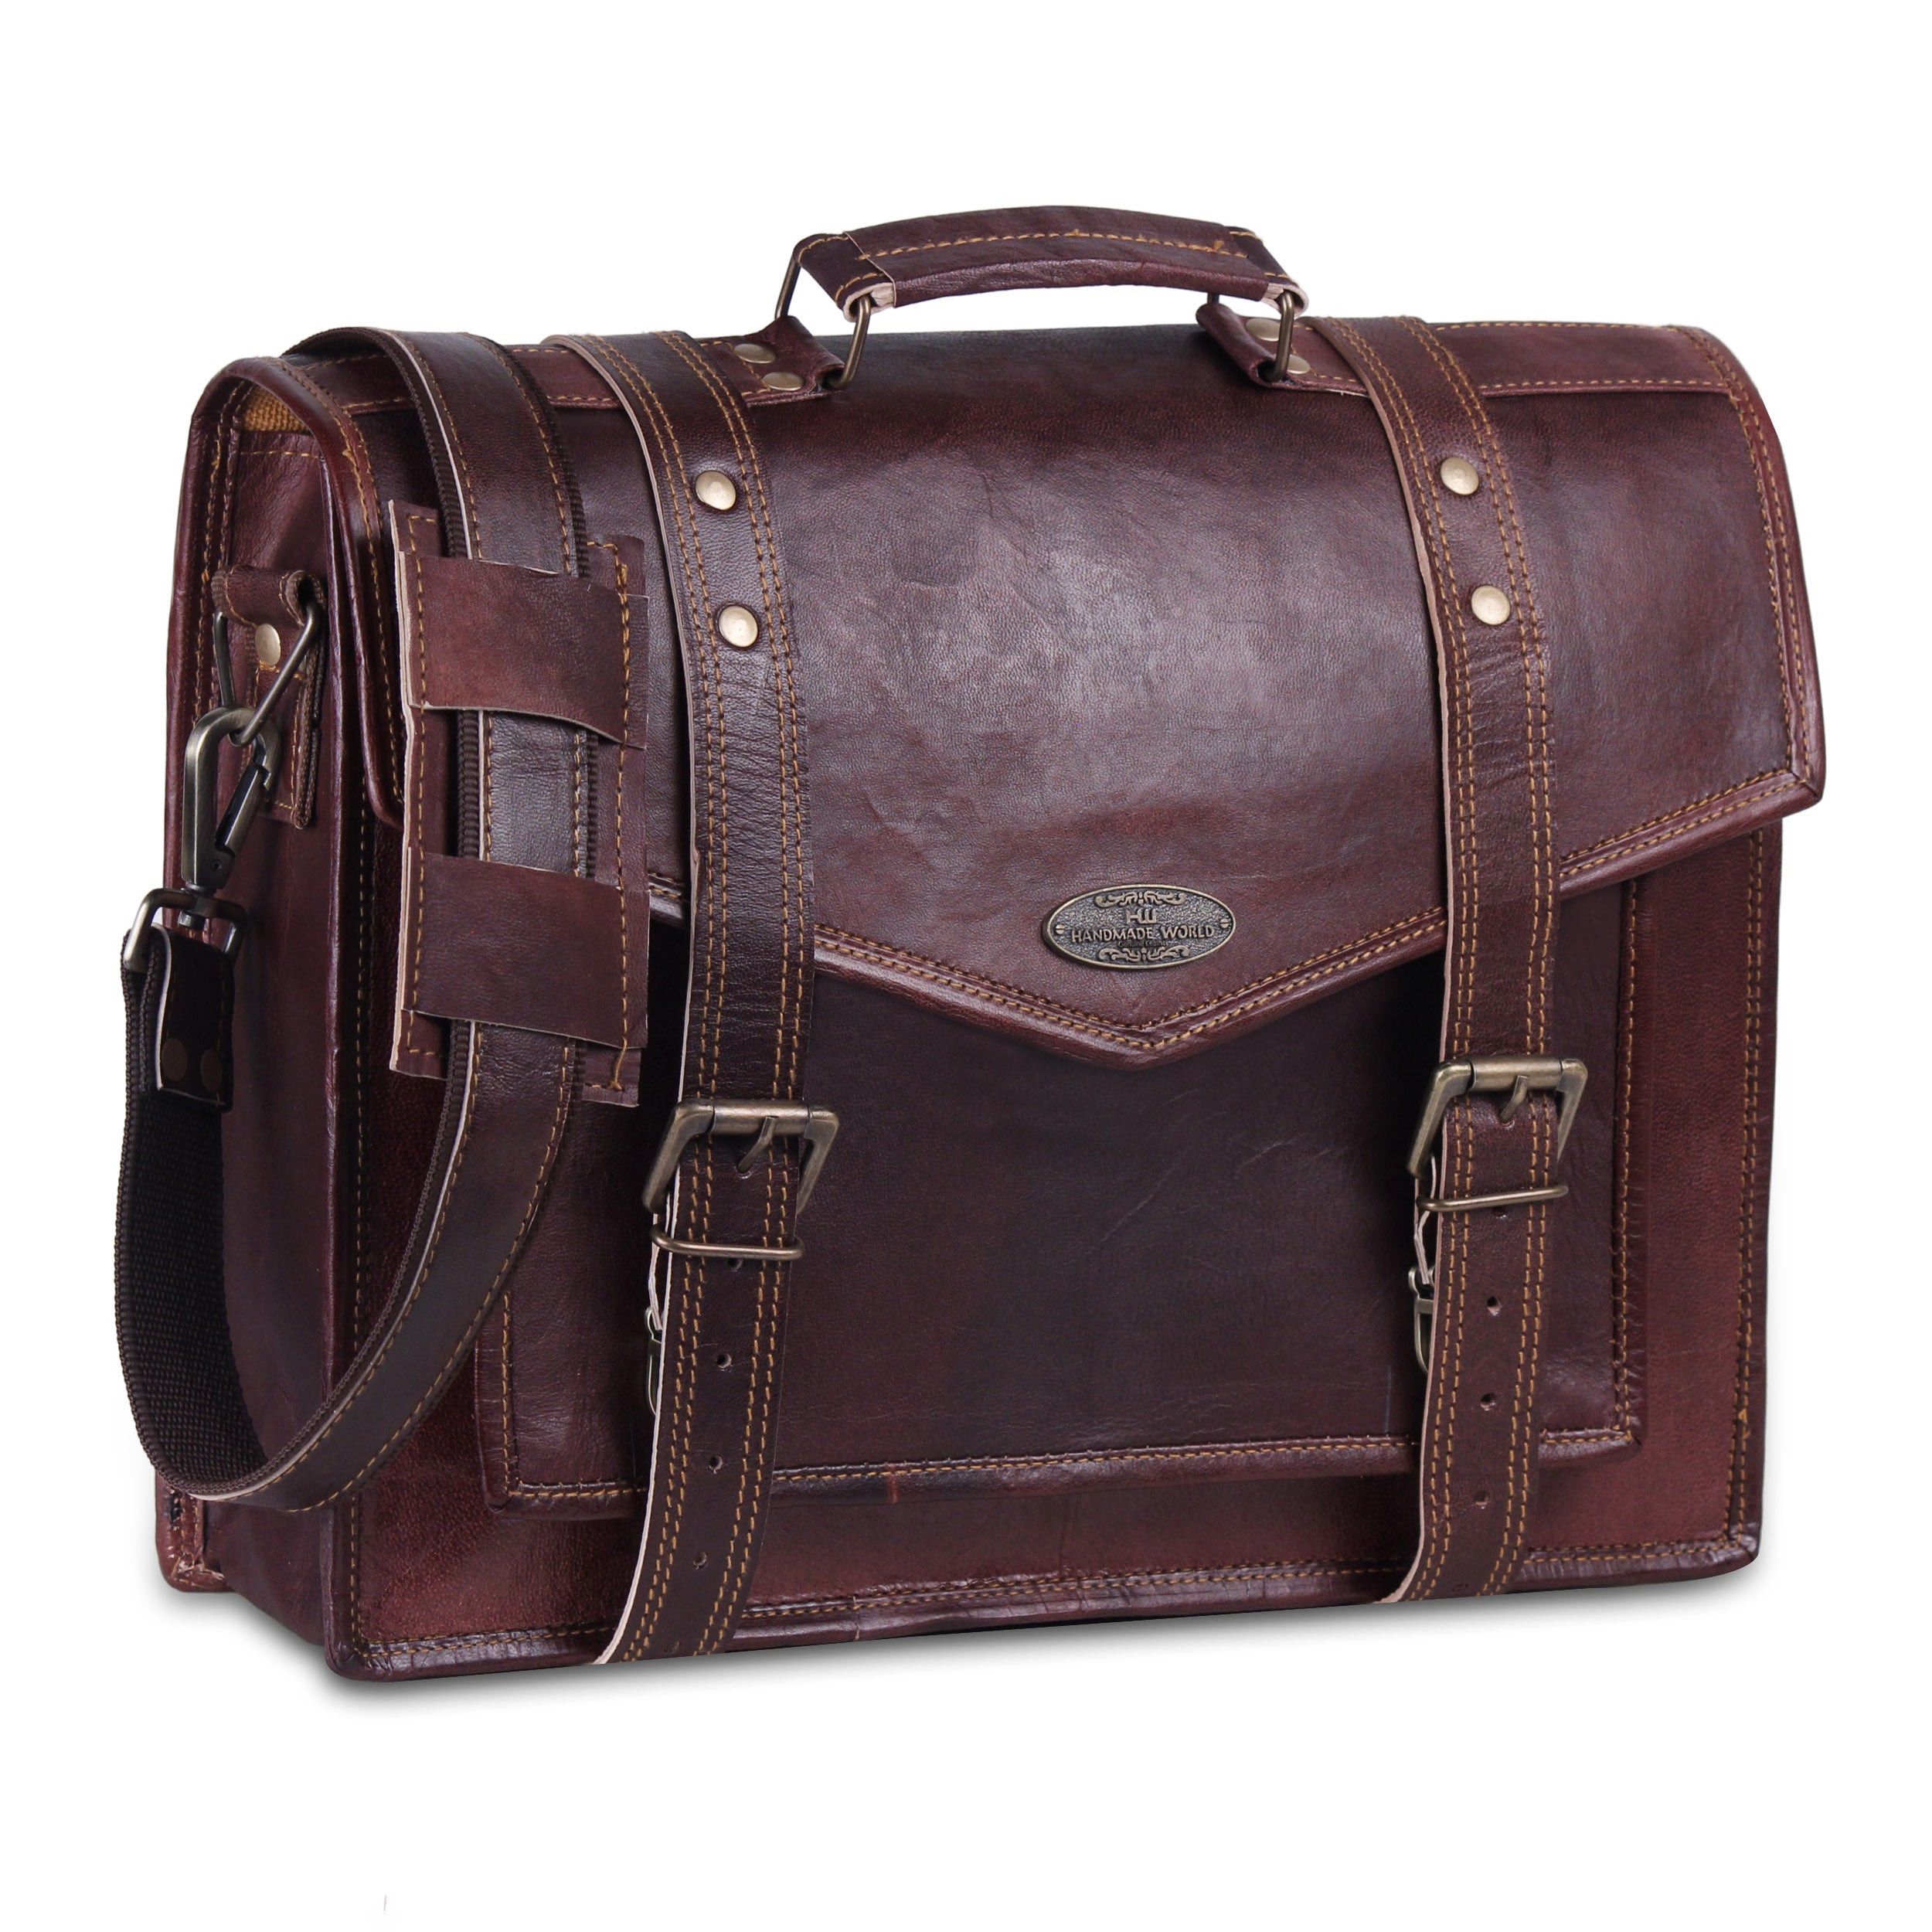 Genuine leather Messenger Bag with V flap and Top Handle